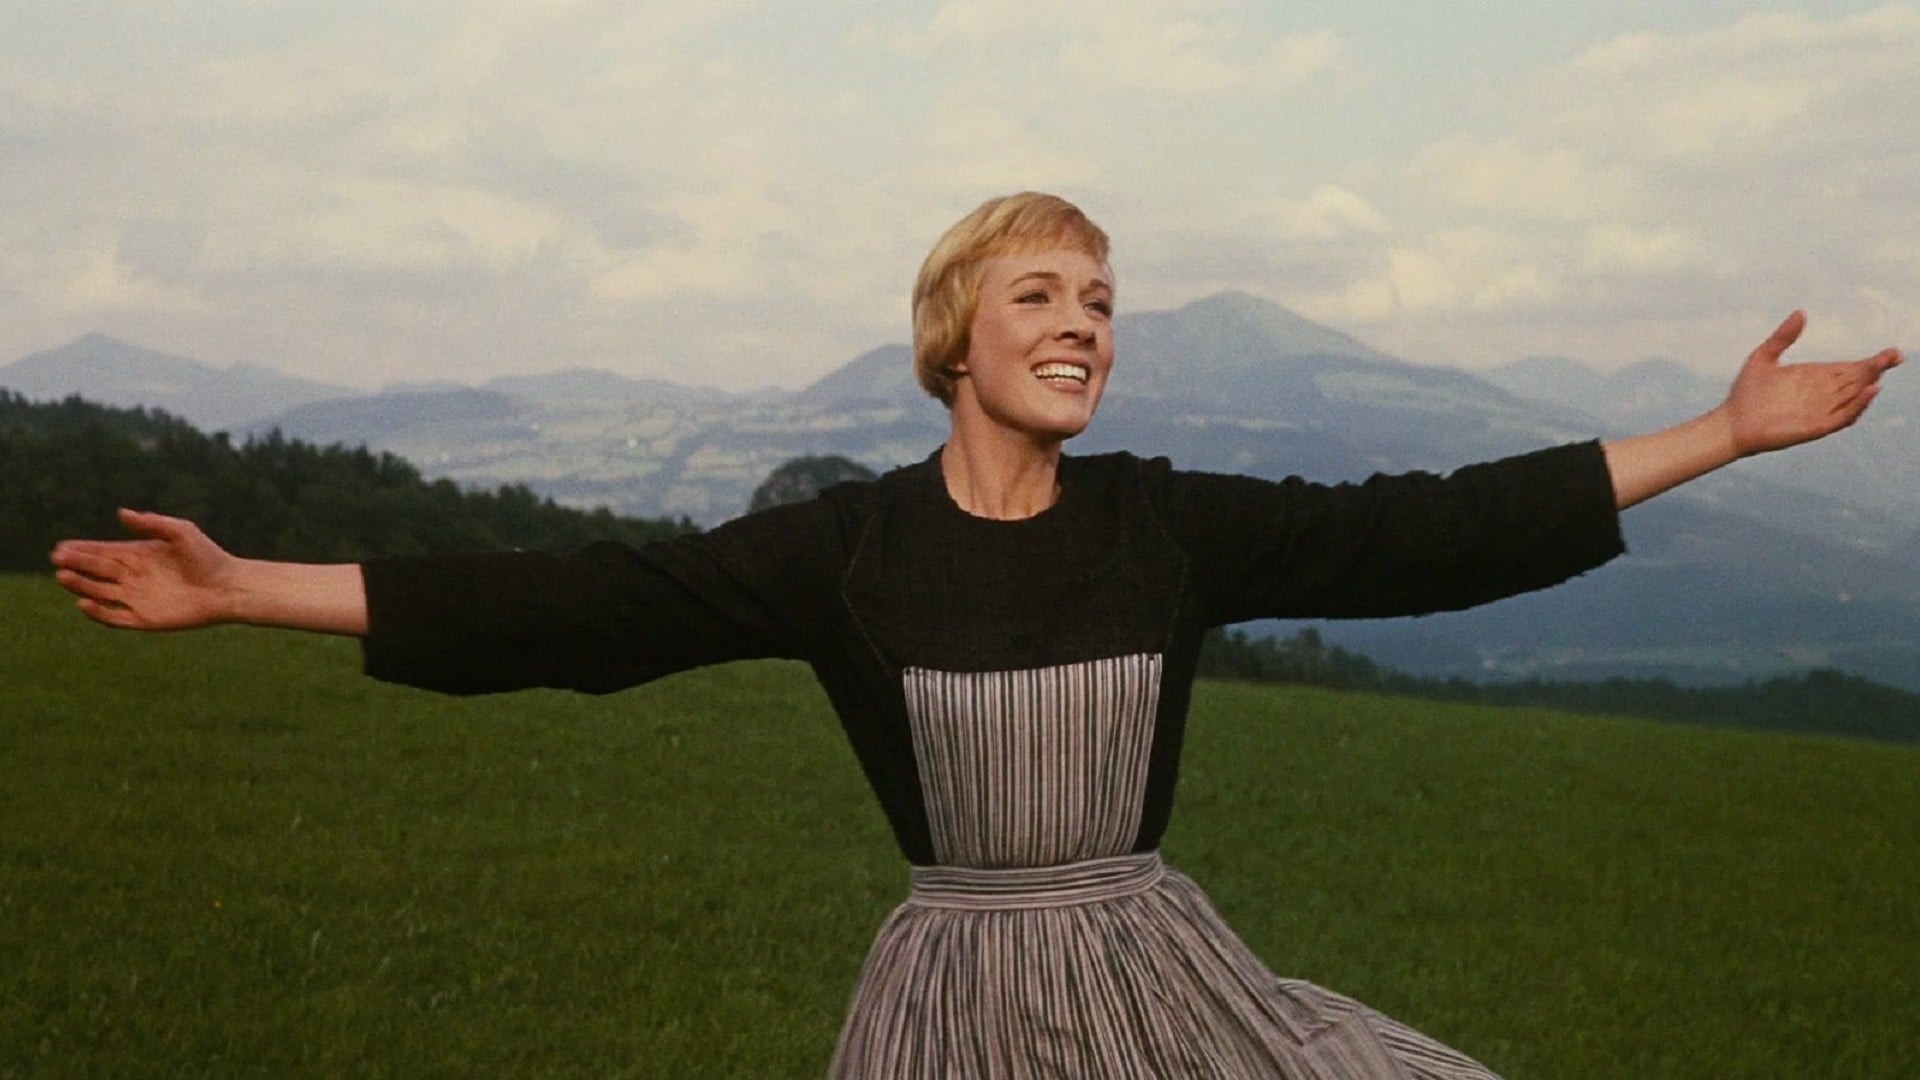 The Sound of Music backdrop